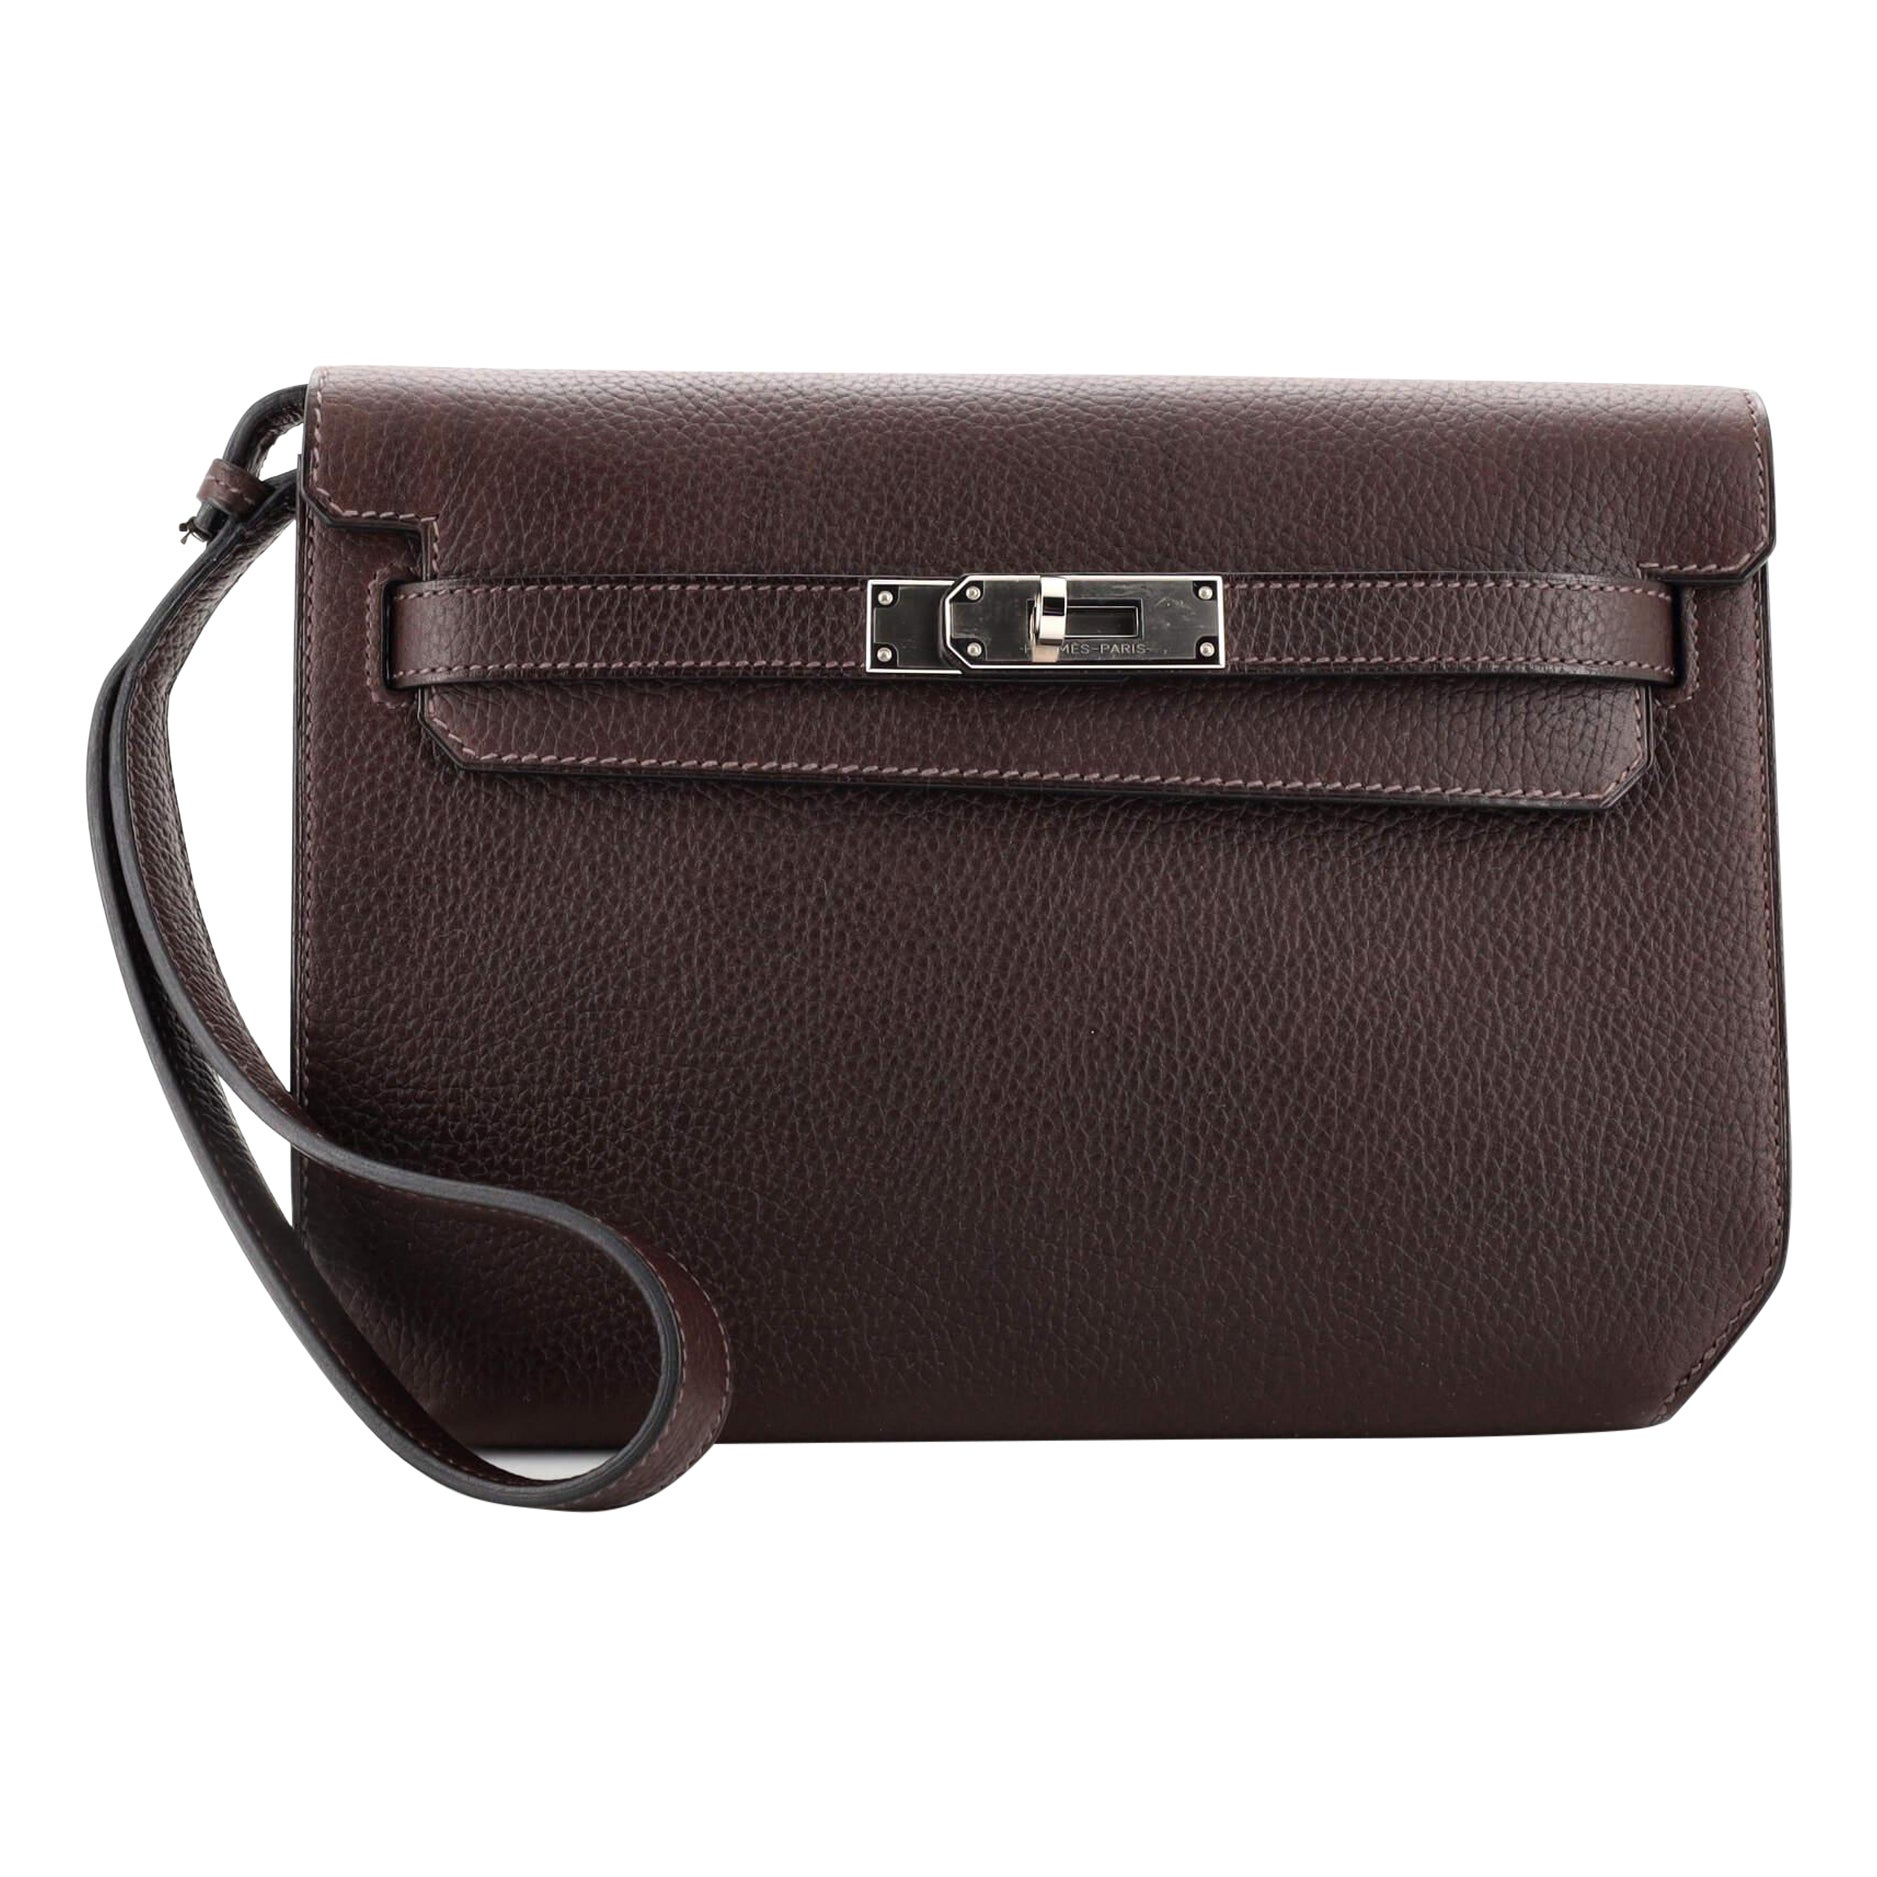 Kelly Depeches Leather Inspired Pouch Bag